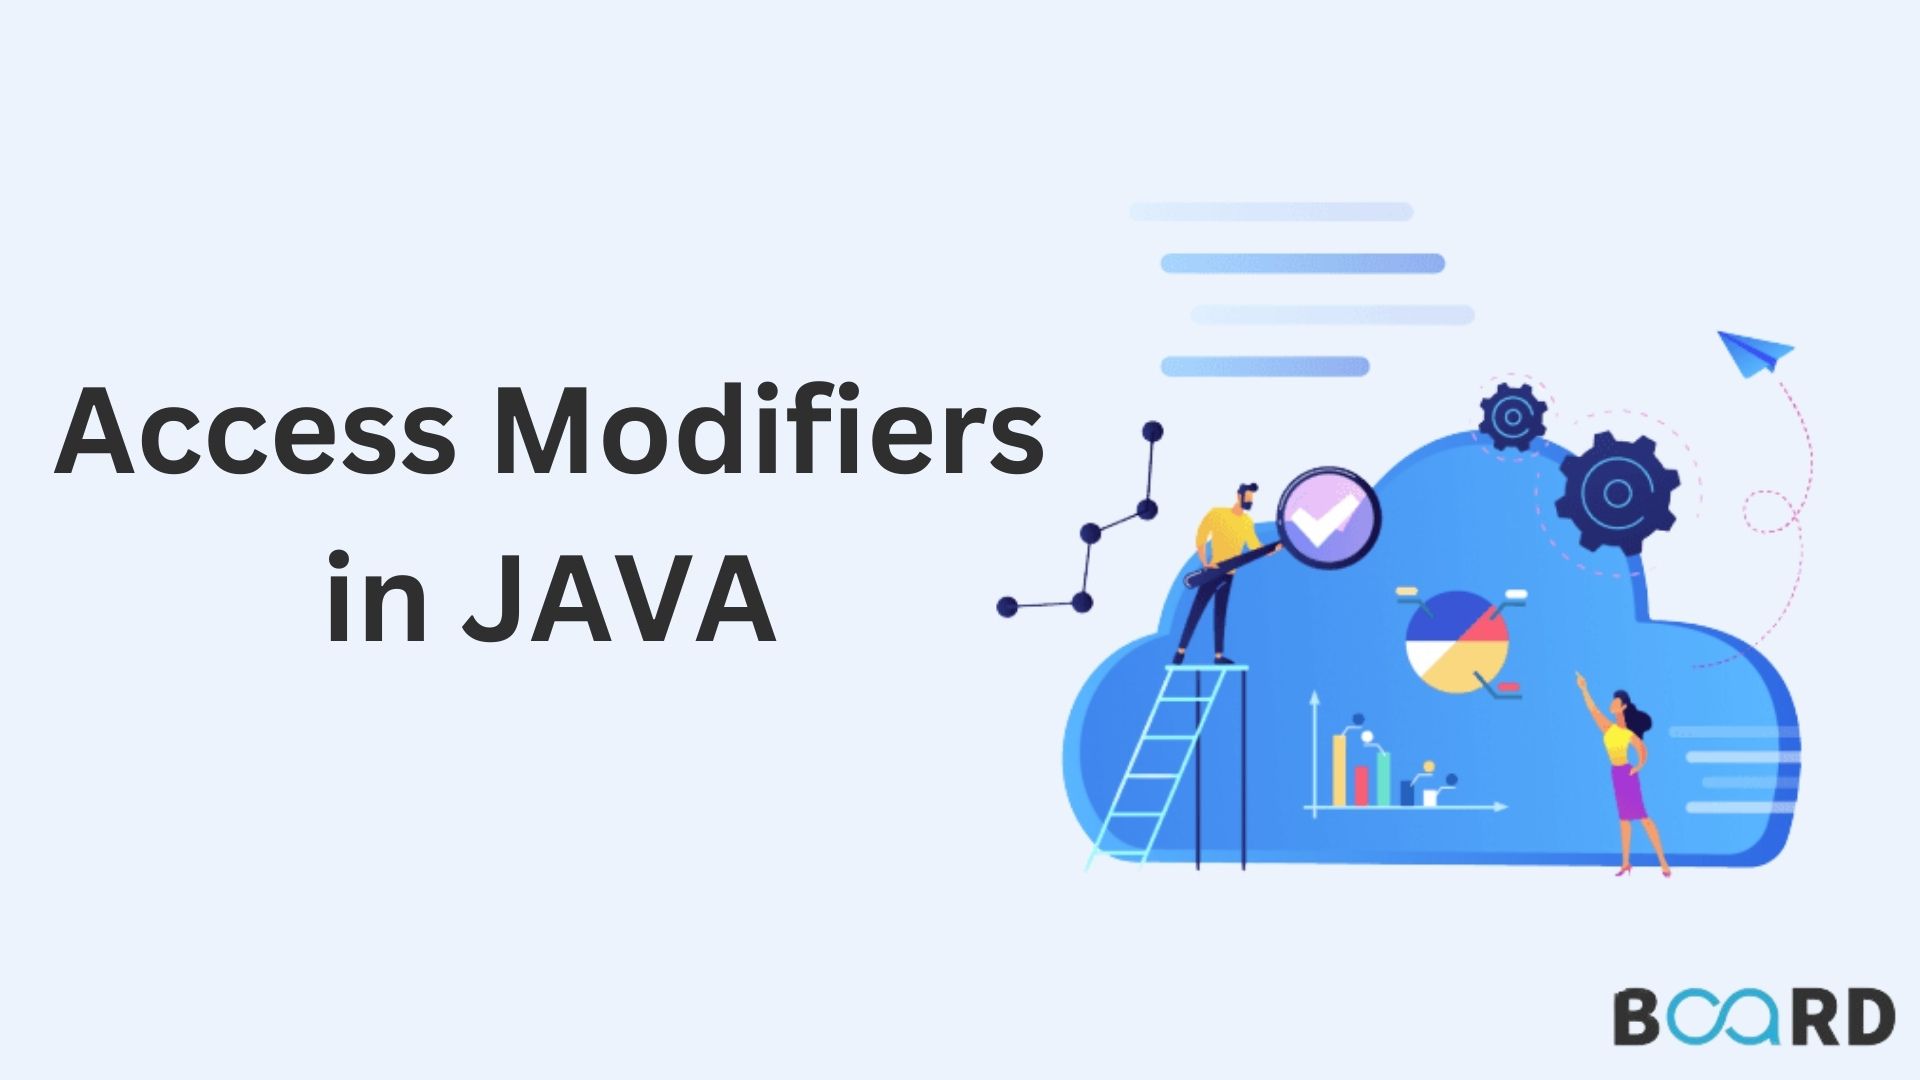 A quick guide to Access Modifiers in Java